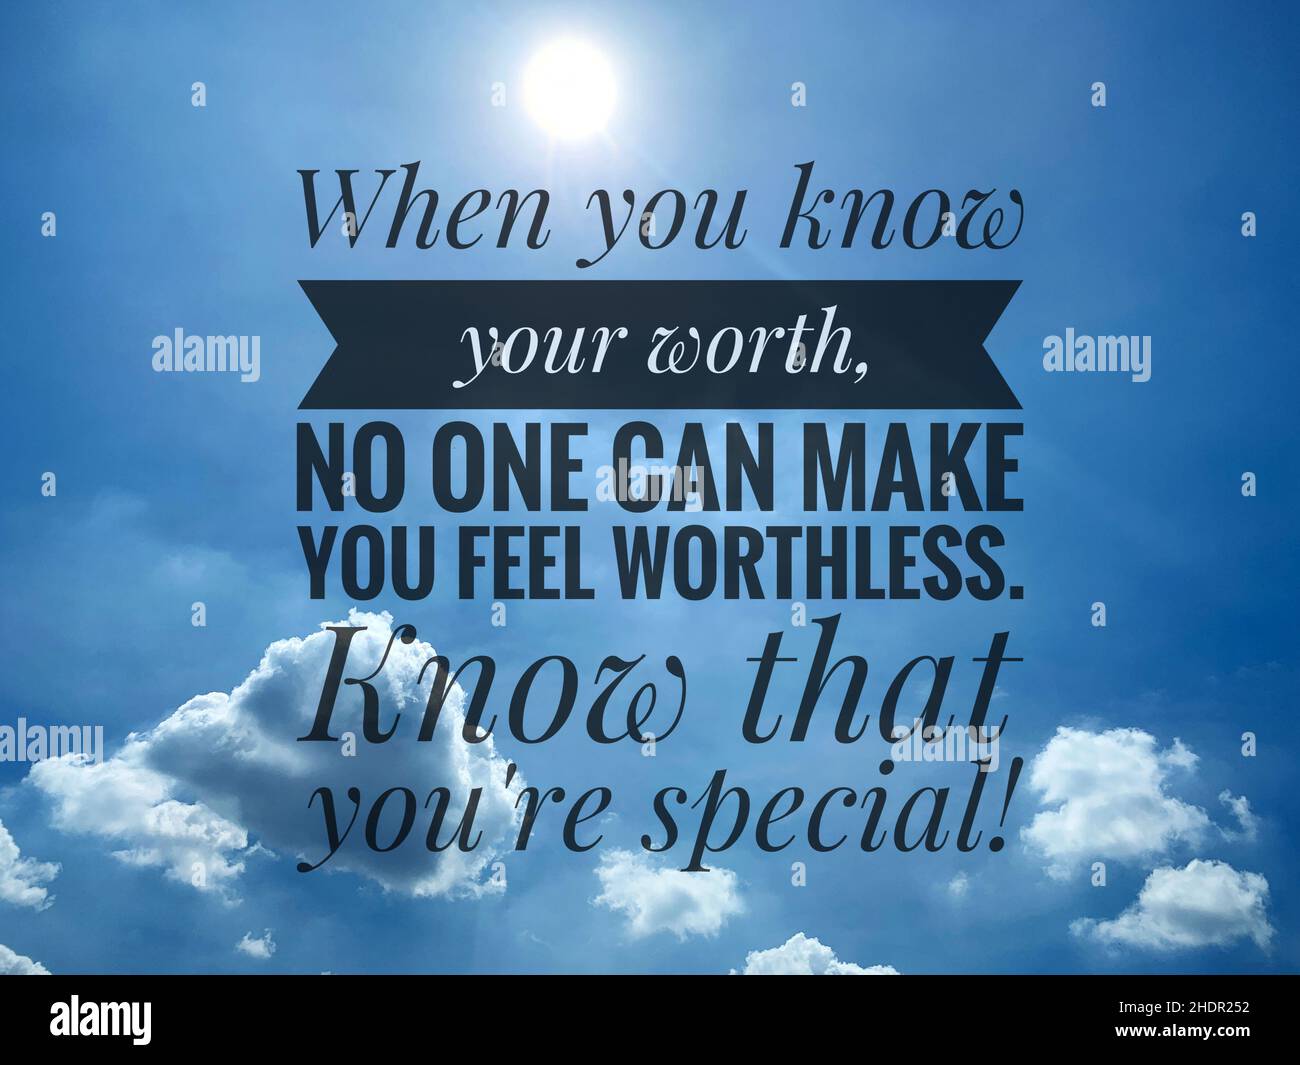 Motivational quotes - When you know your worth, no one can make you feel worthless. Beautiful blue sky and sun shining background. Stock Photo